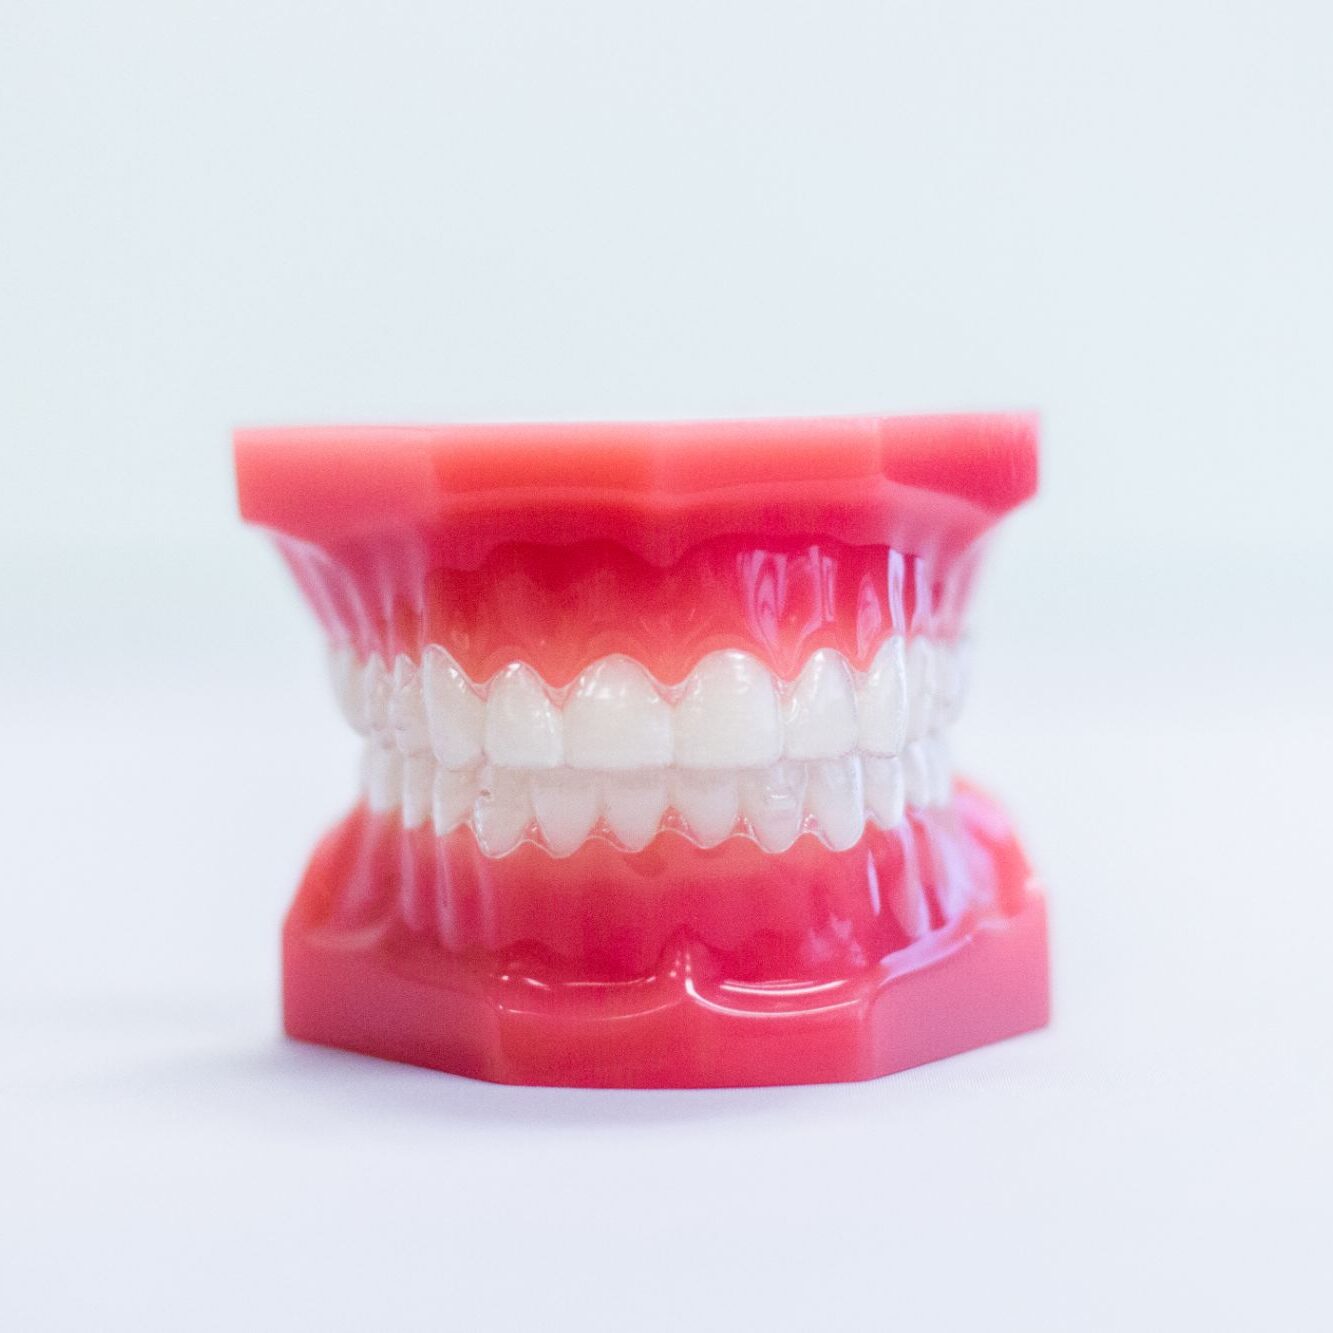 teeth model with Invisalign